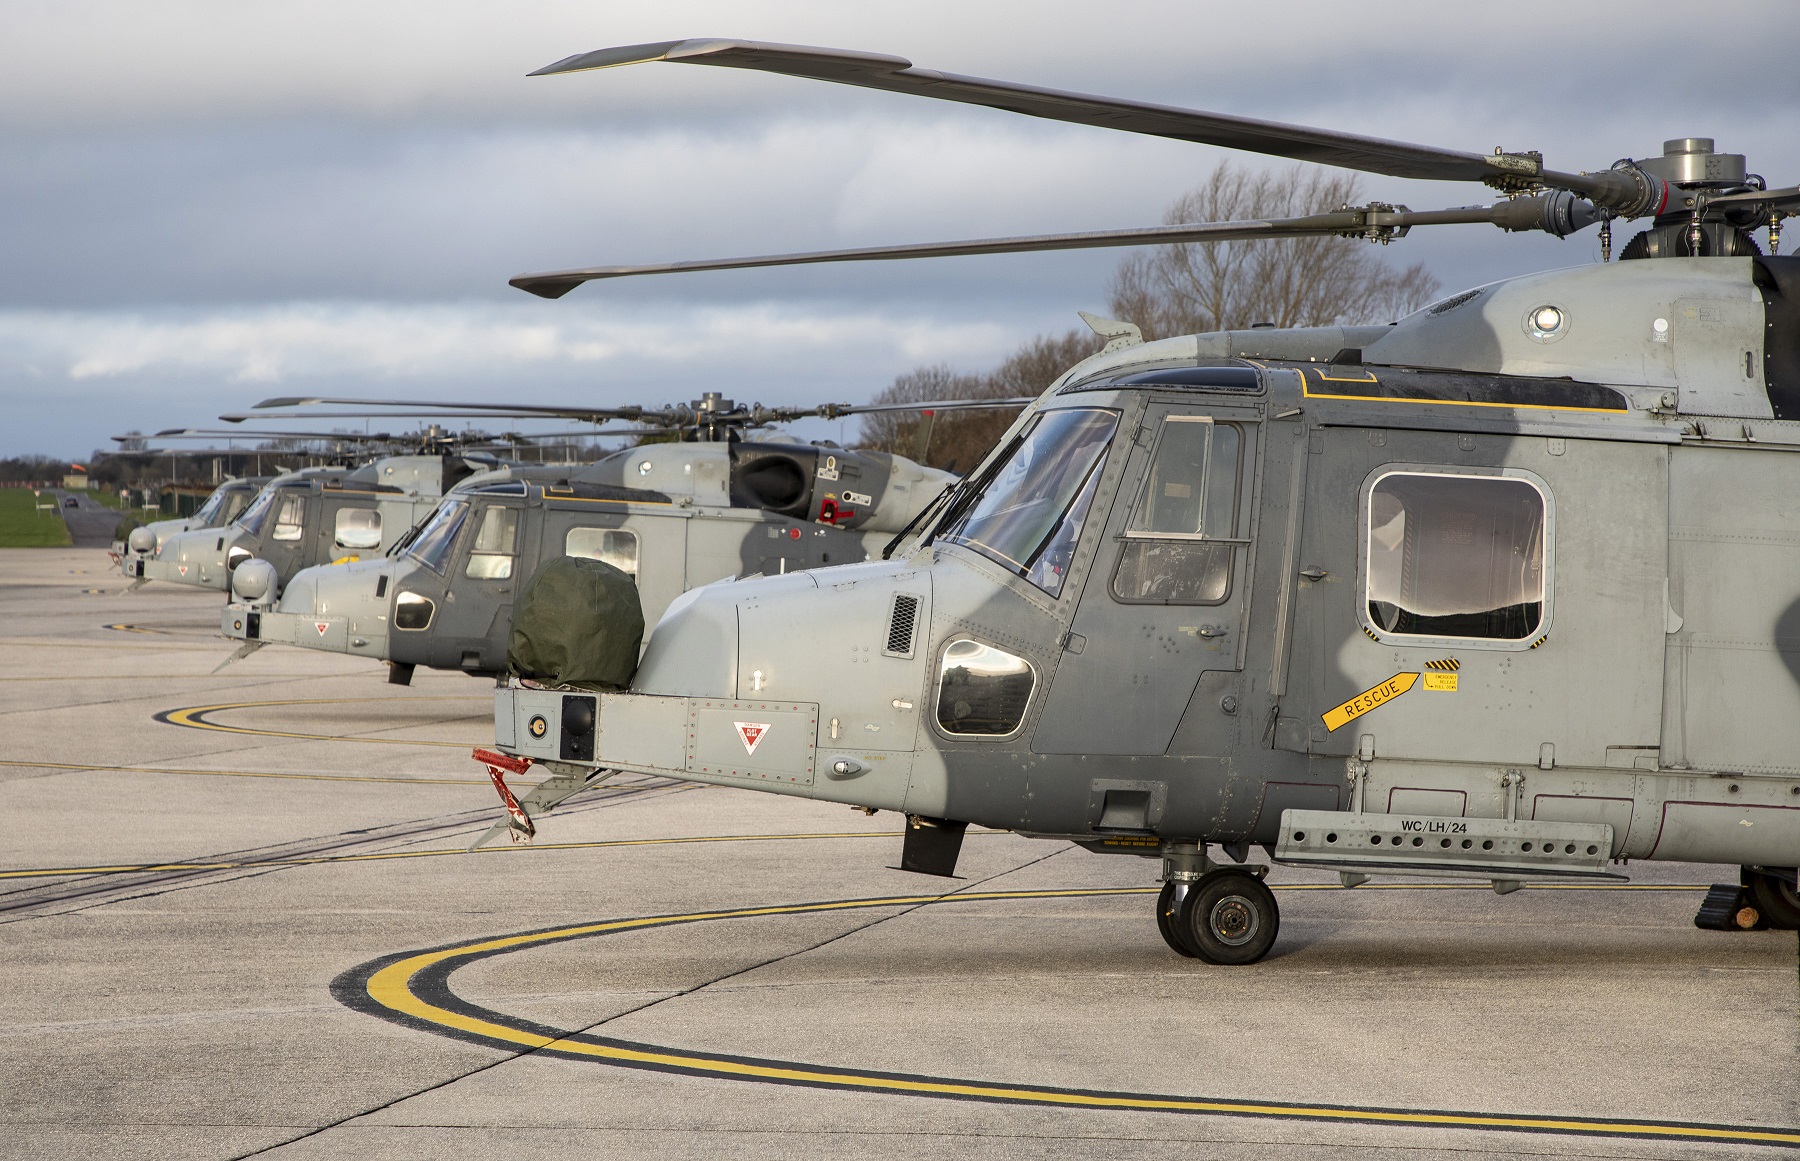 Four Wildcat helicopters